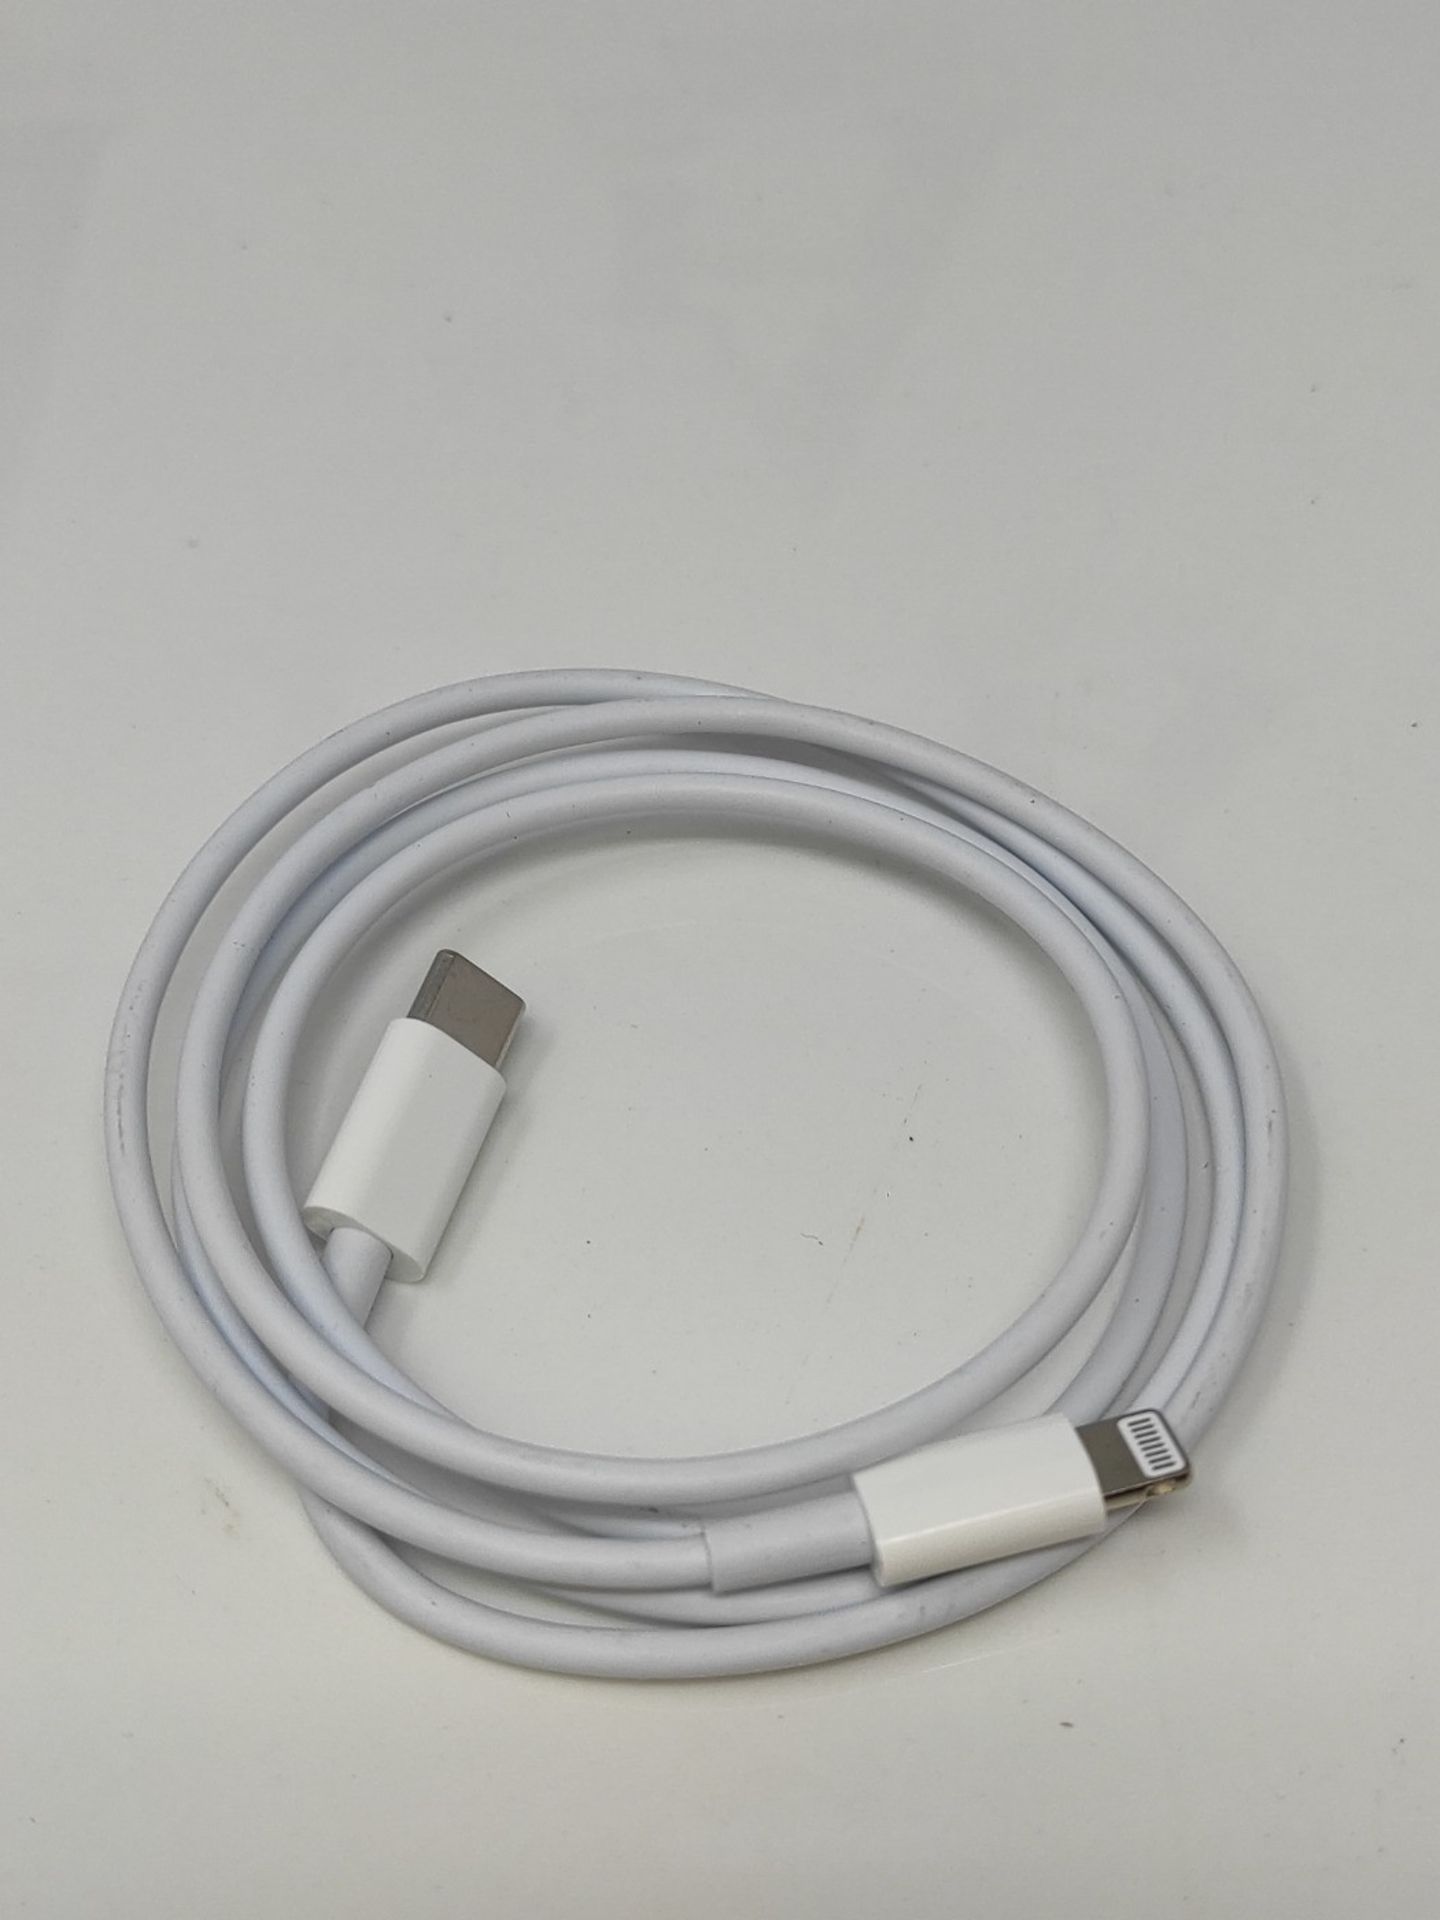 Apple USB-C to Lightning Cable (1m) - Image 2 of 4